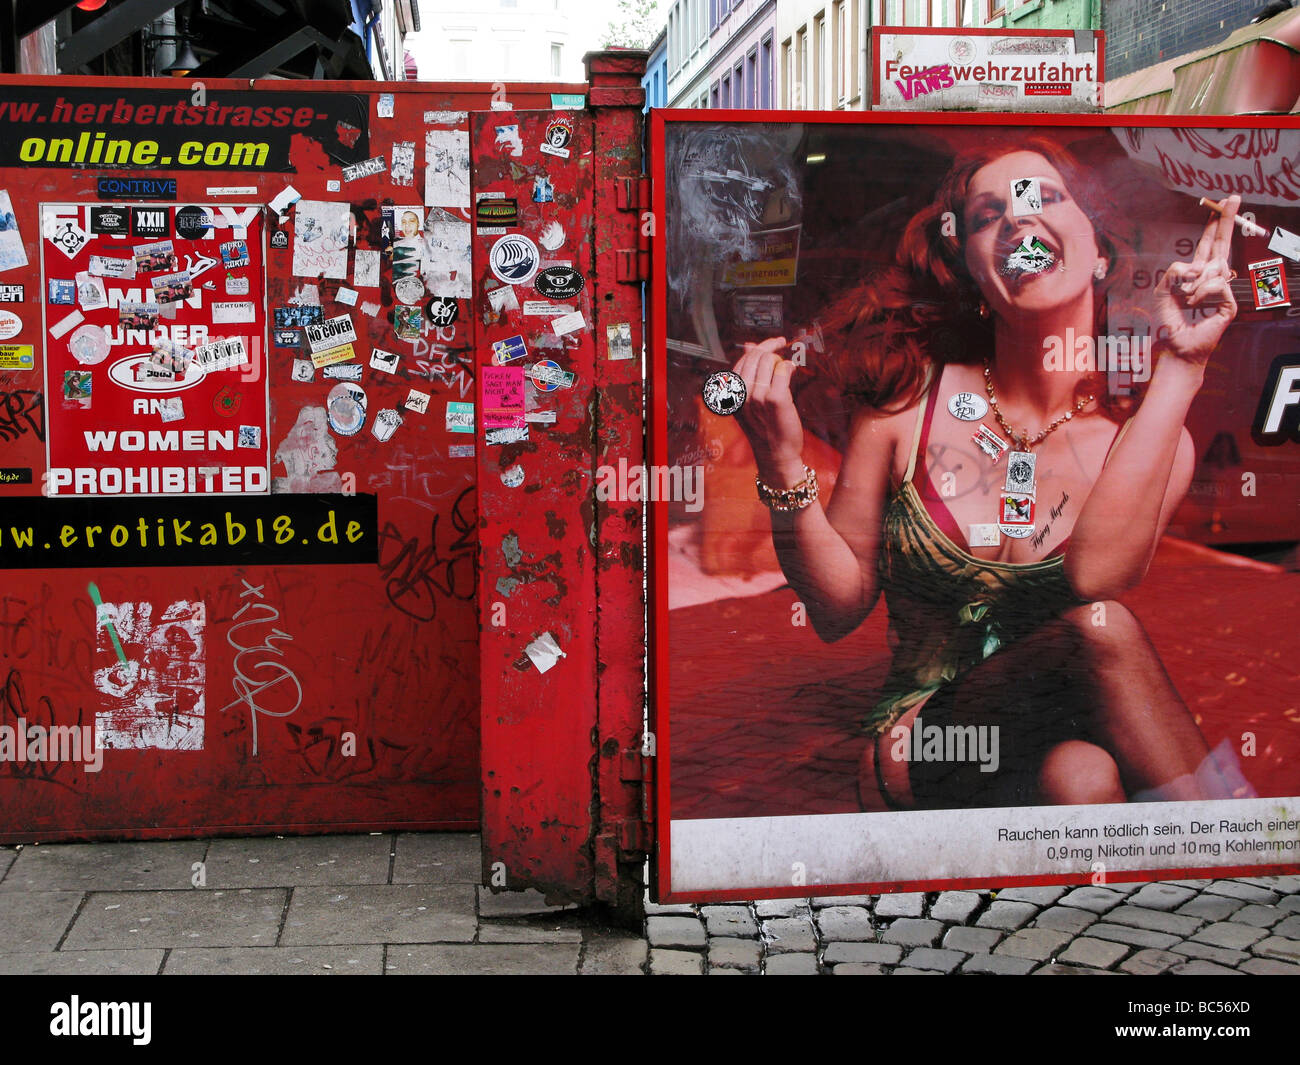 Restricted Entrance for Woman and Children to Herbertstrasse Reeperbahn in St Pauli Hamburg Germany Stock Photo